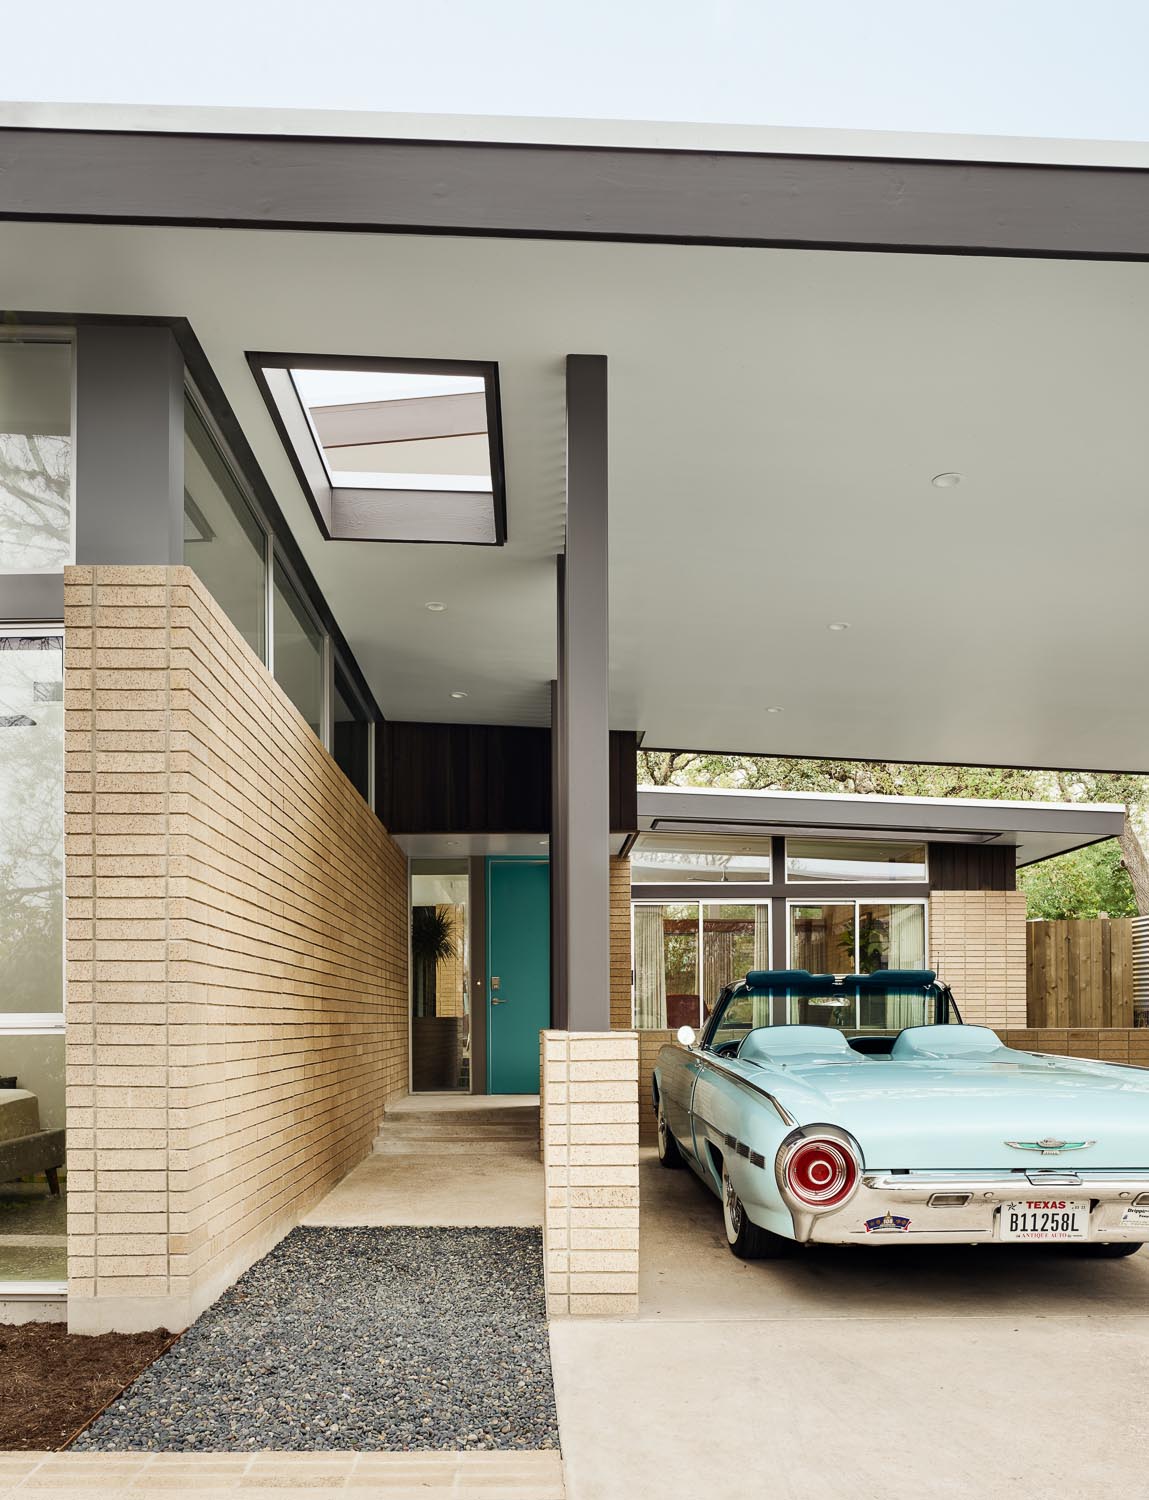 A mid-century modern inspired home with a turquoise front door and a carport.